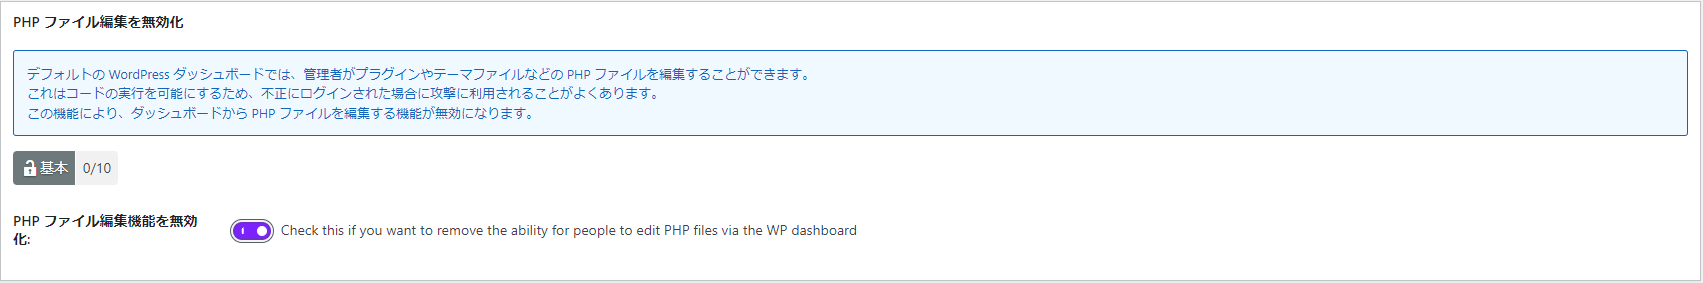 PHPファイル編集を無効化